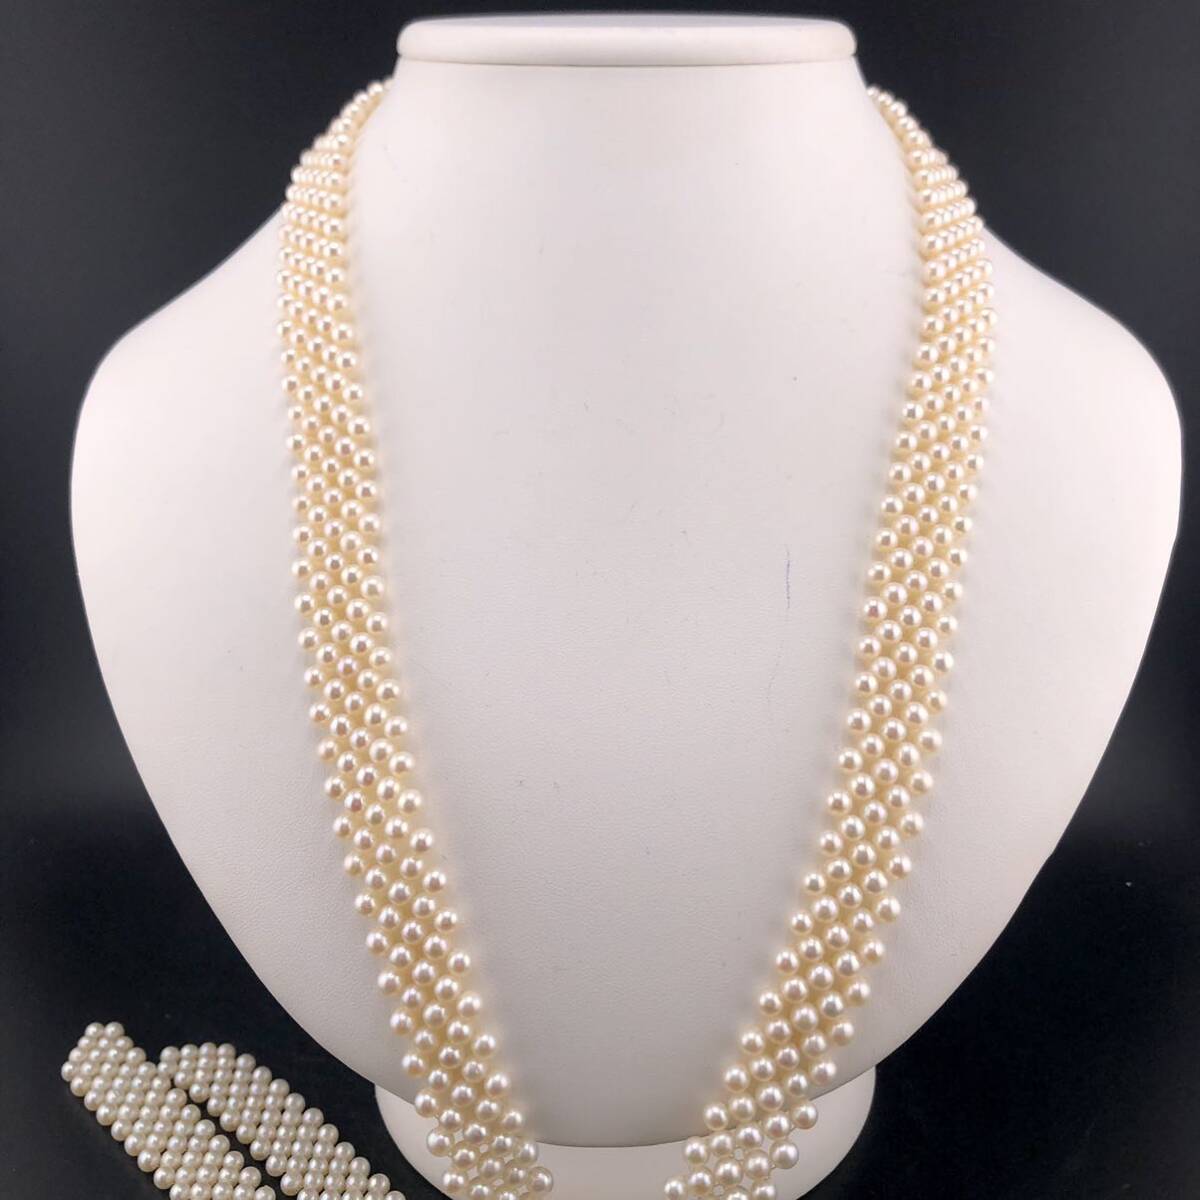 P05-0035 デザインロングパールネックレス 4.0mm 約 98cm 89.8g ( デザイン ロング Pearl necklace accessory )_画像1